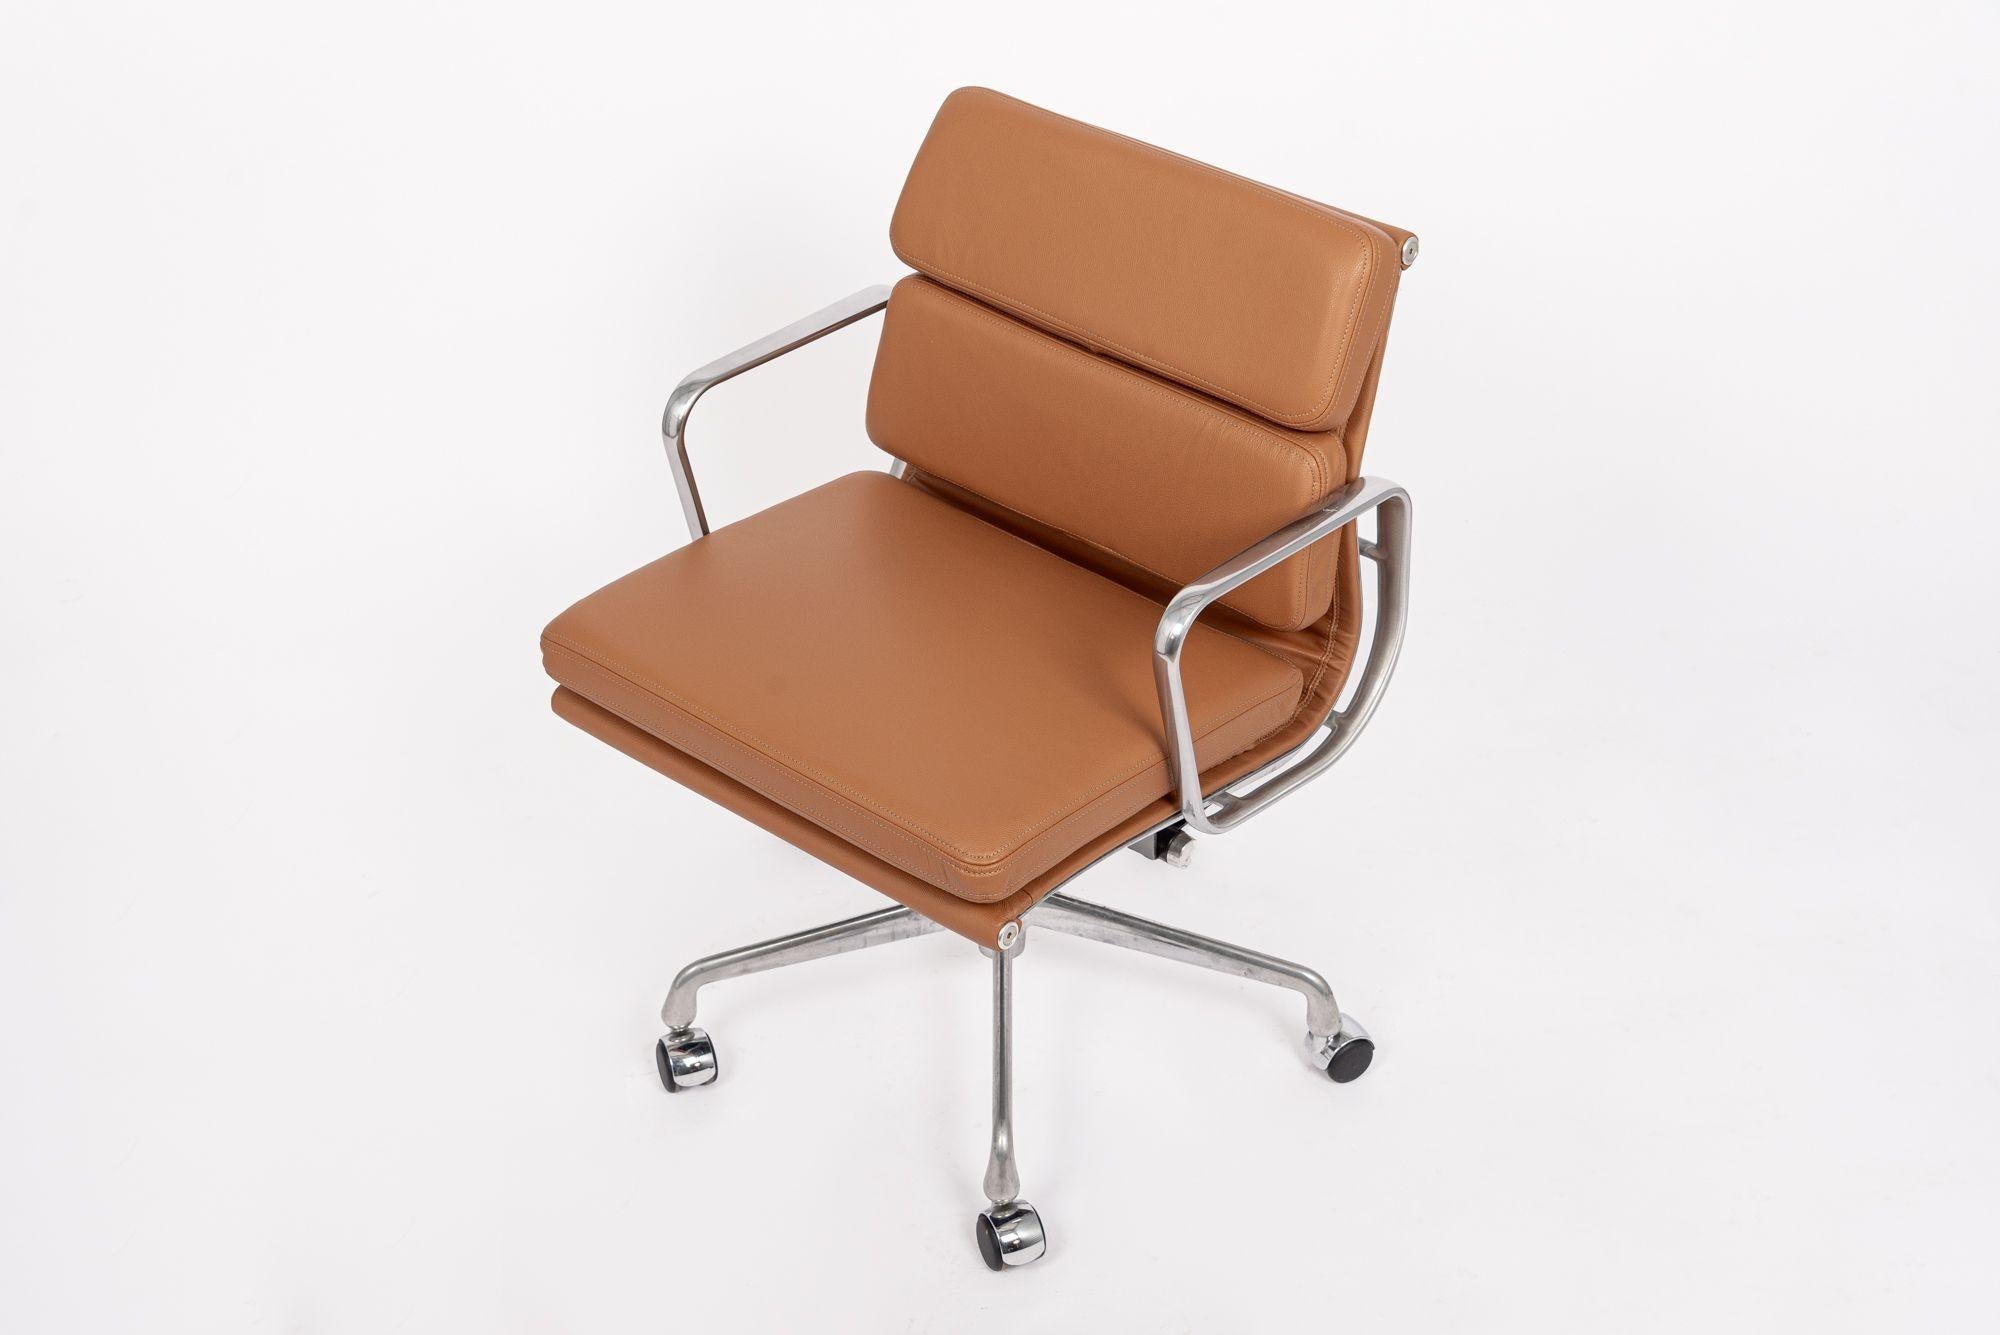 Eames Herman Miller Brown Leather Desk Chair Soft Pad 2000s For Sale 2